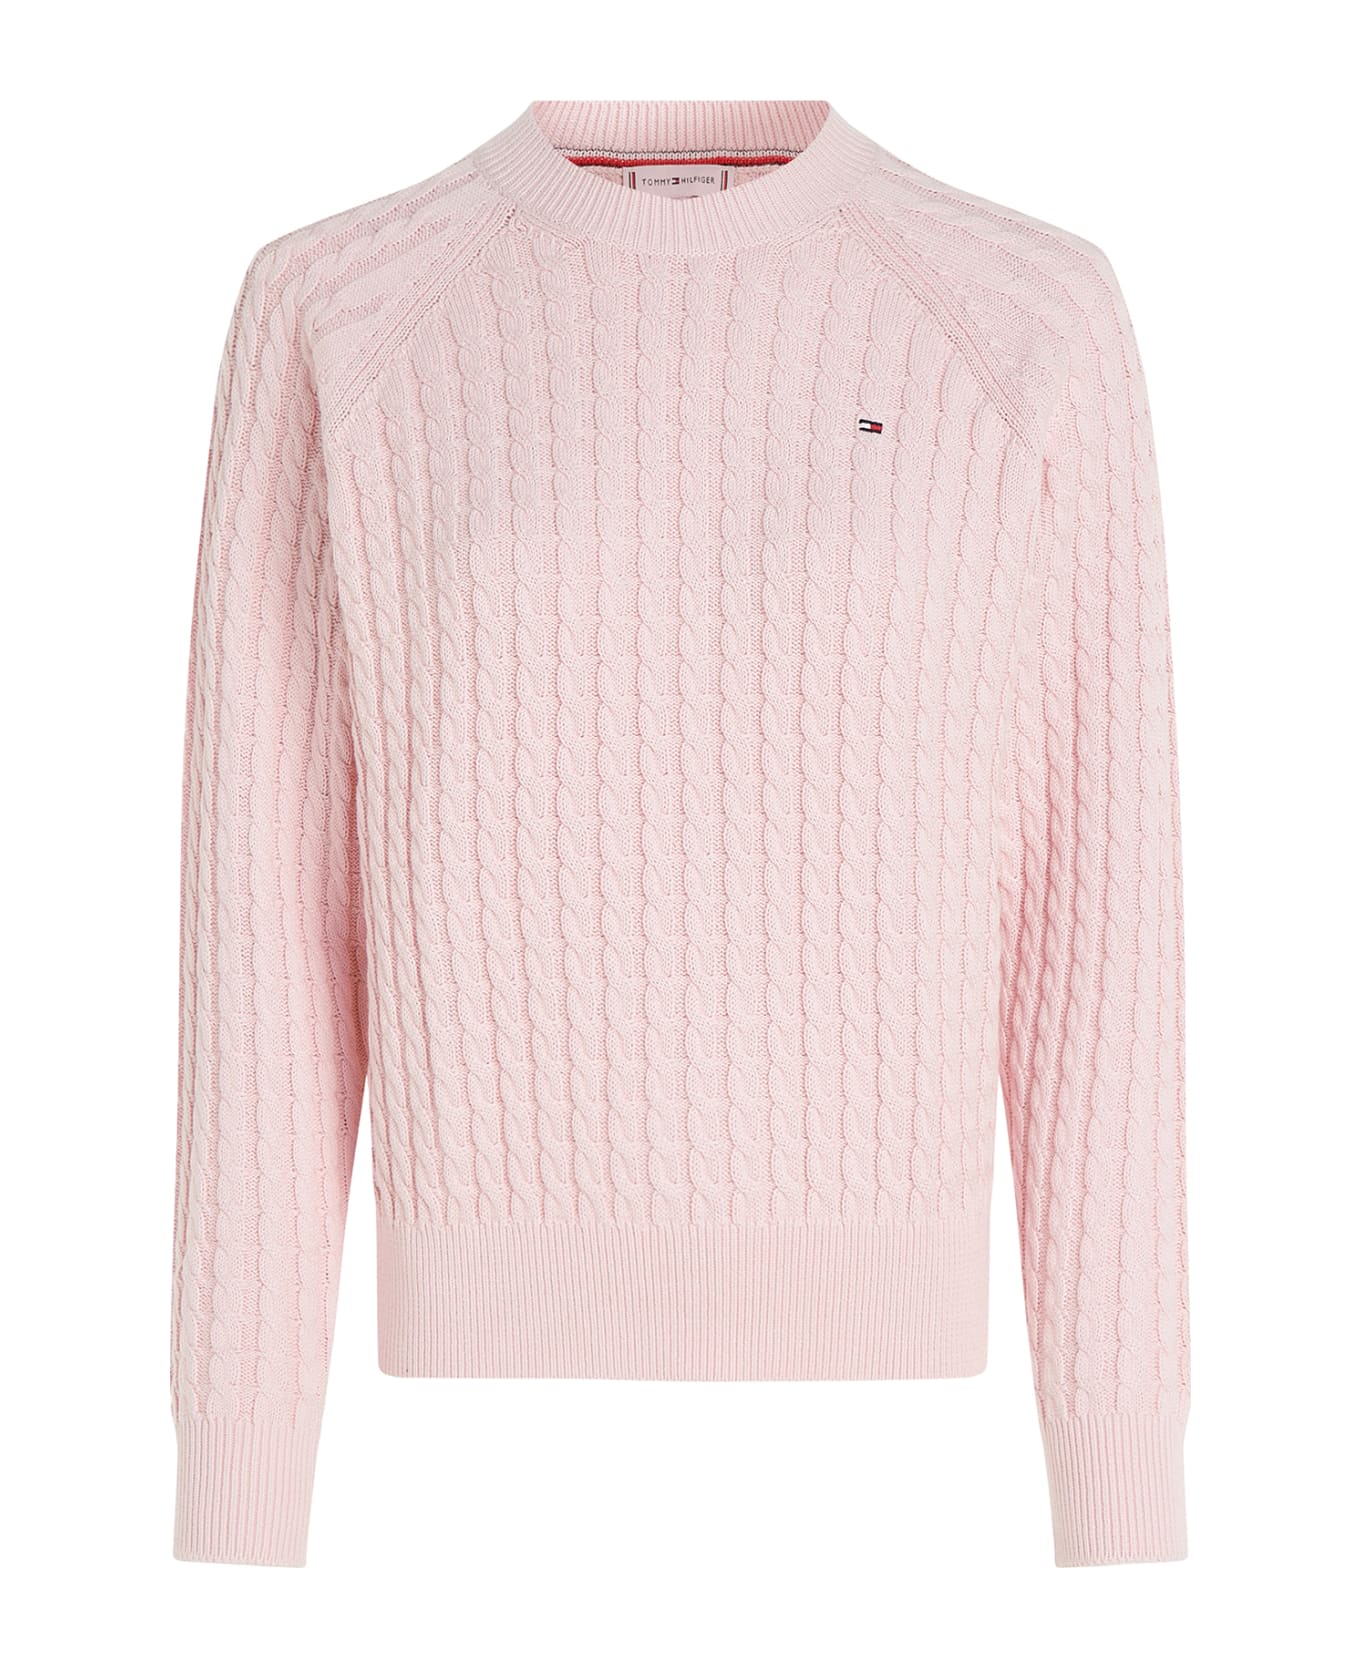 Tommy Hilfiger Pink Relaxed-fit Sweater In Woven Knit - WHIMSY PINK